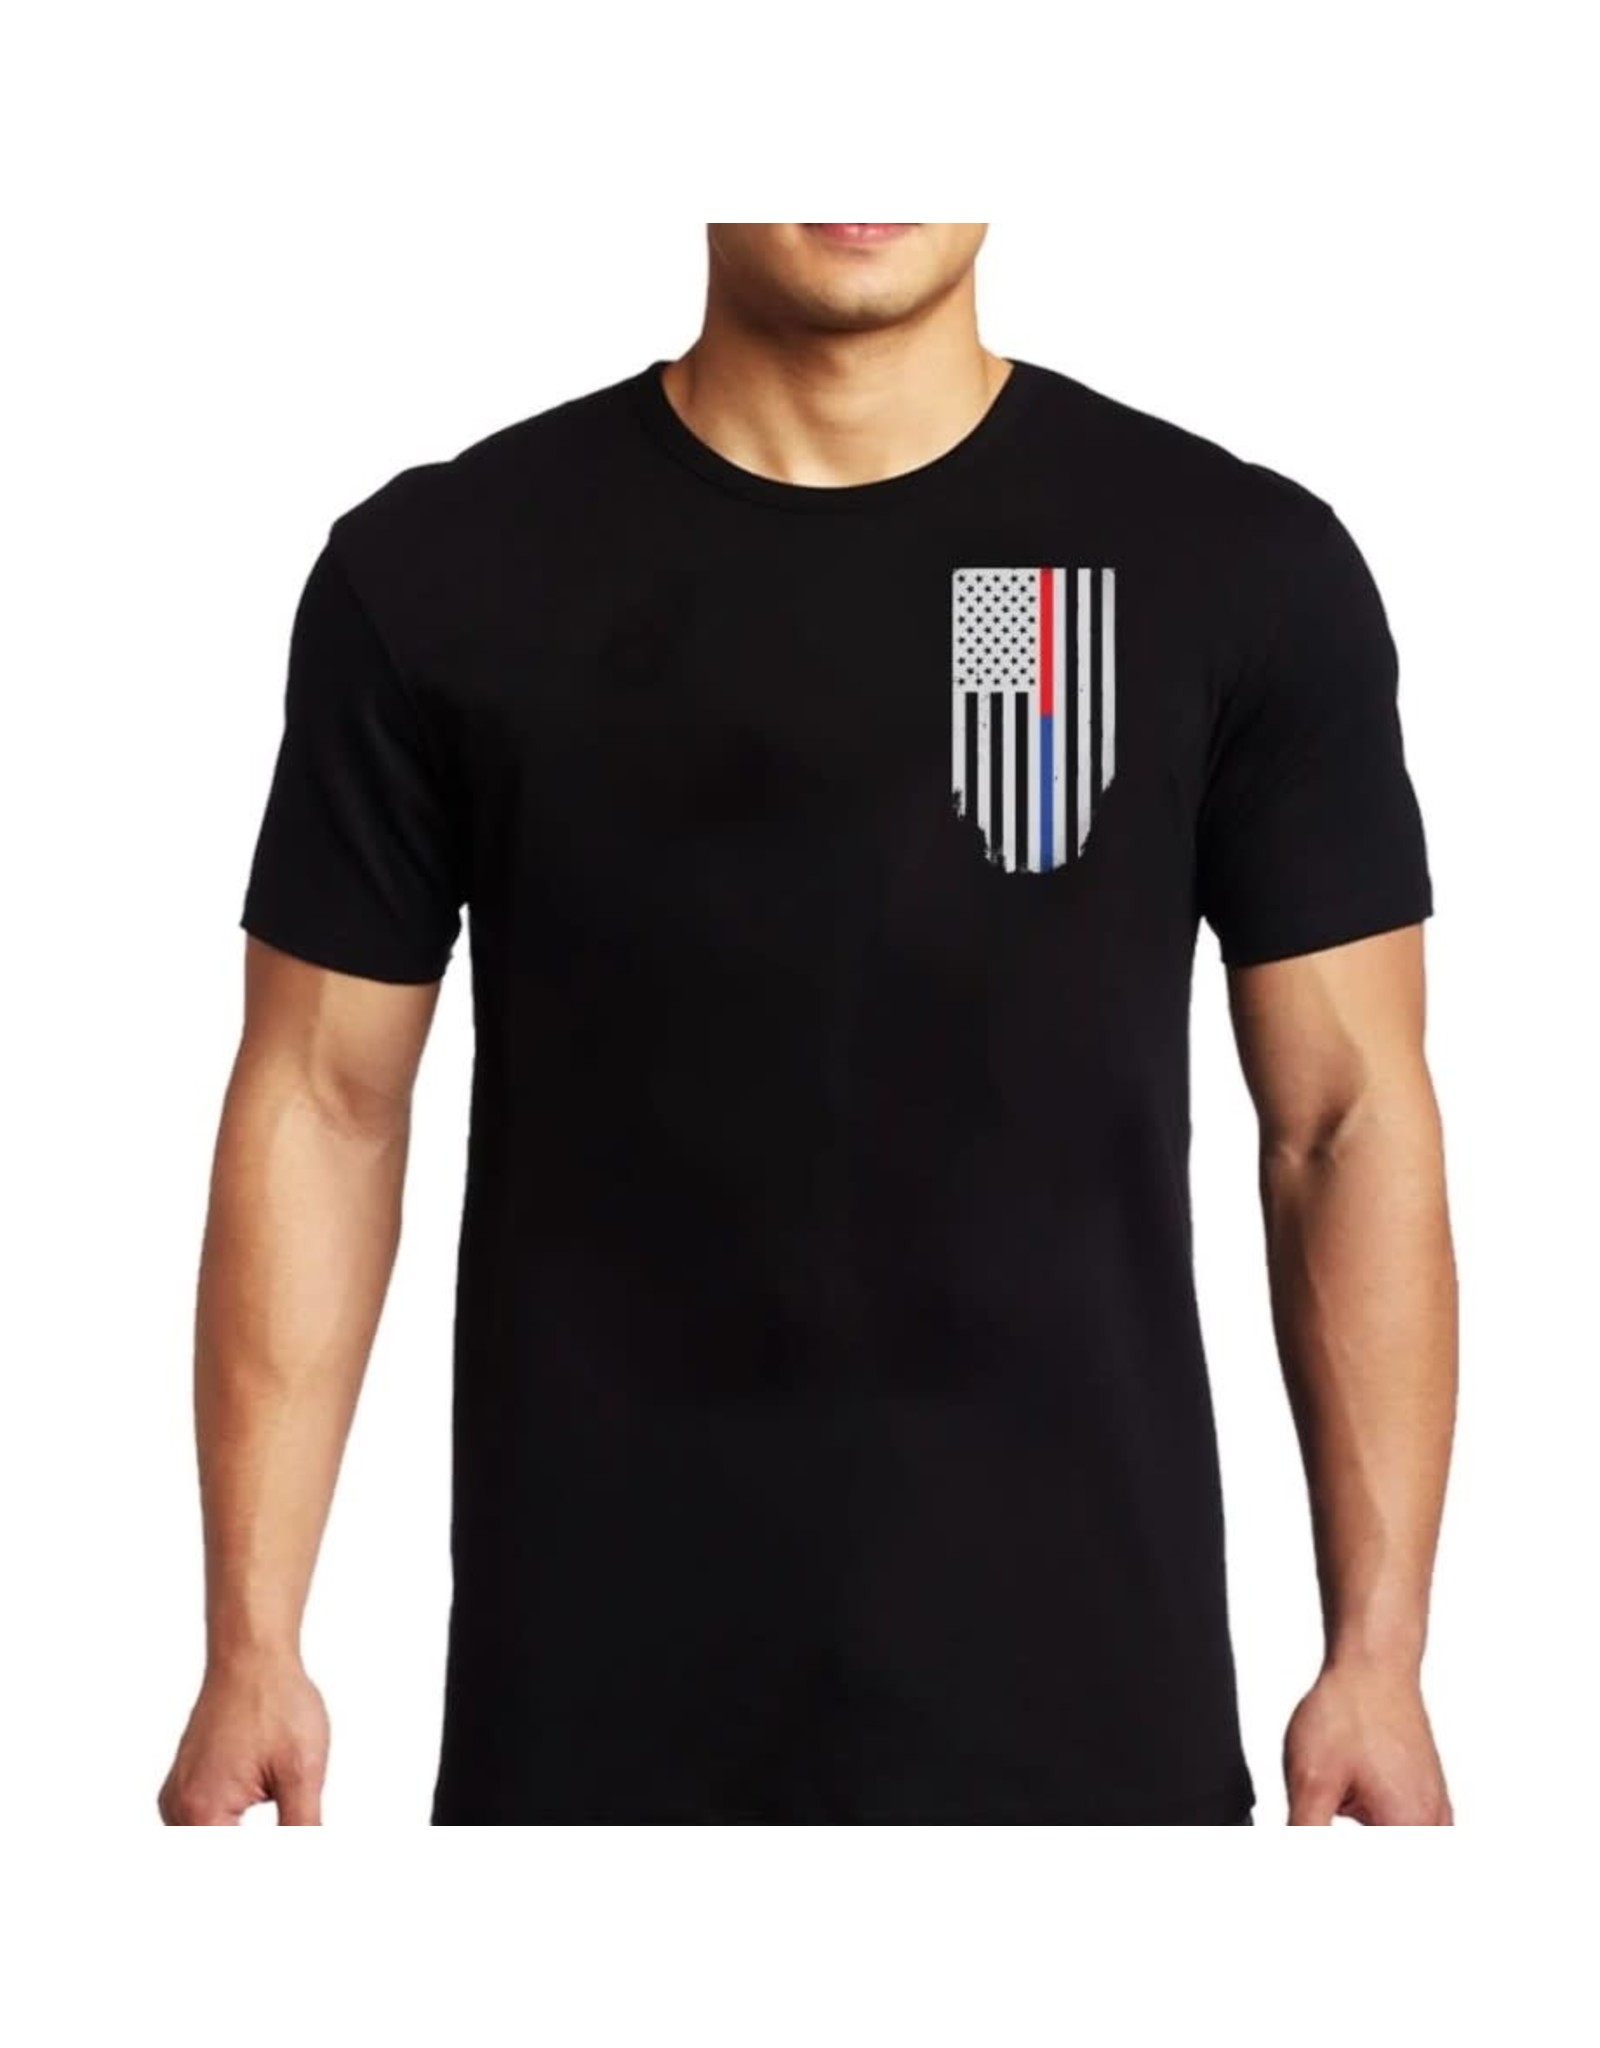 Thin Blue Line USA Honor and Respect Thin Red and Blue Line Women's T-Shirt